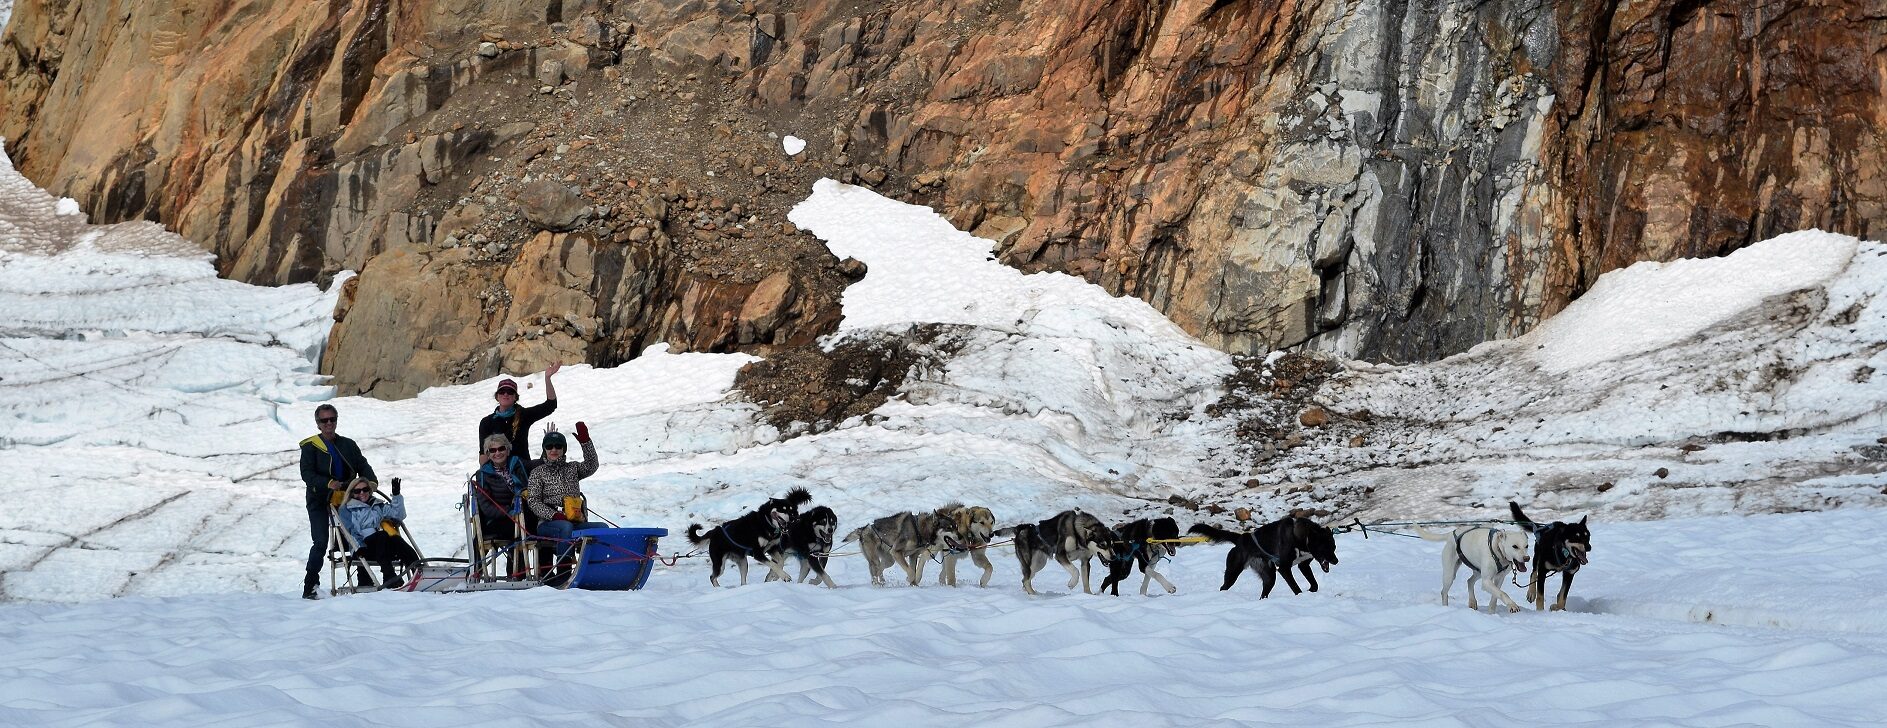 A man is pulling a sled with dogs in the snow.